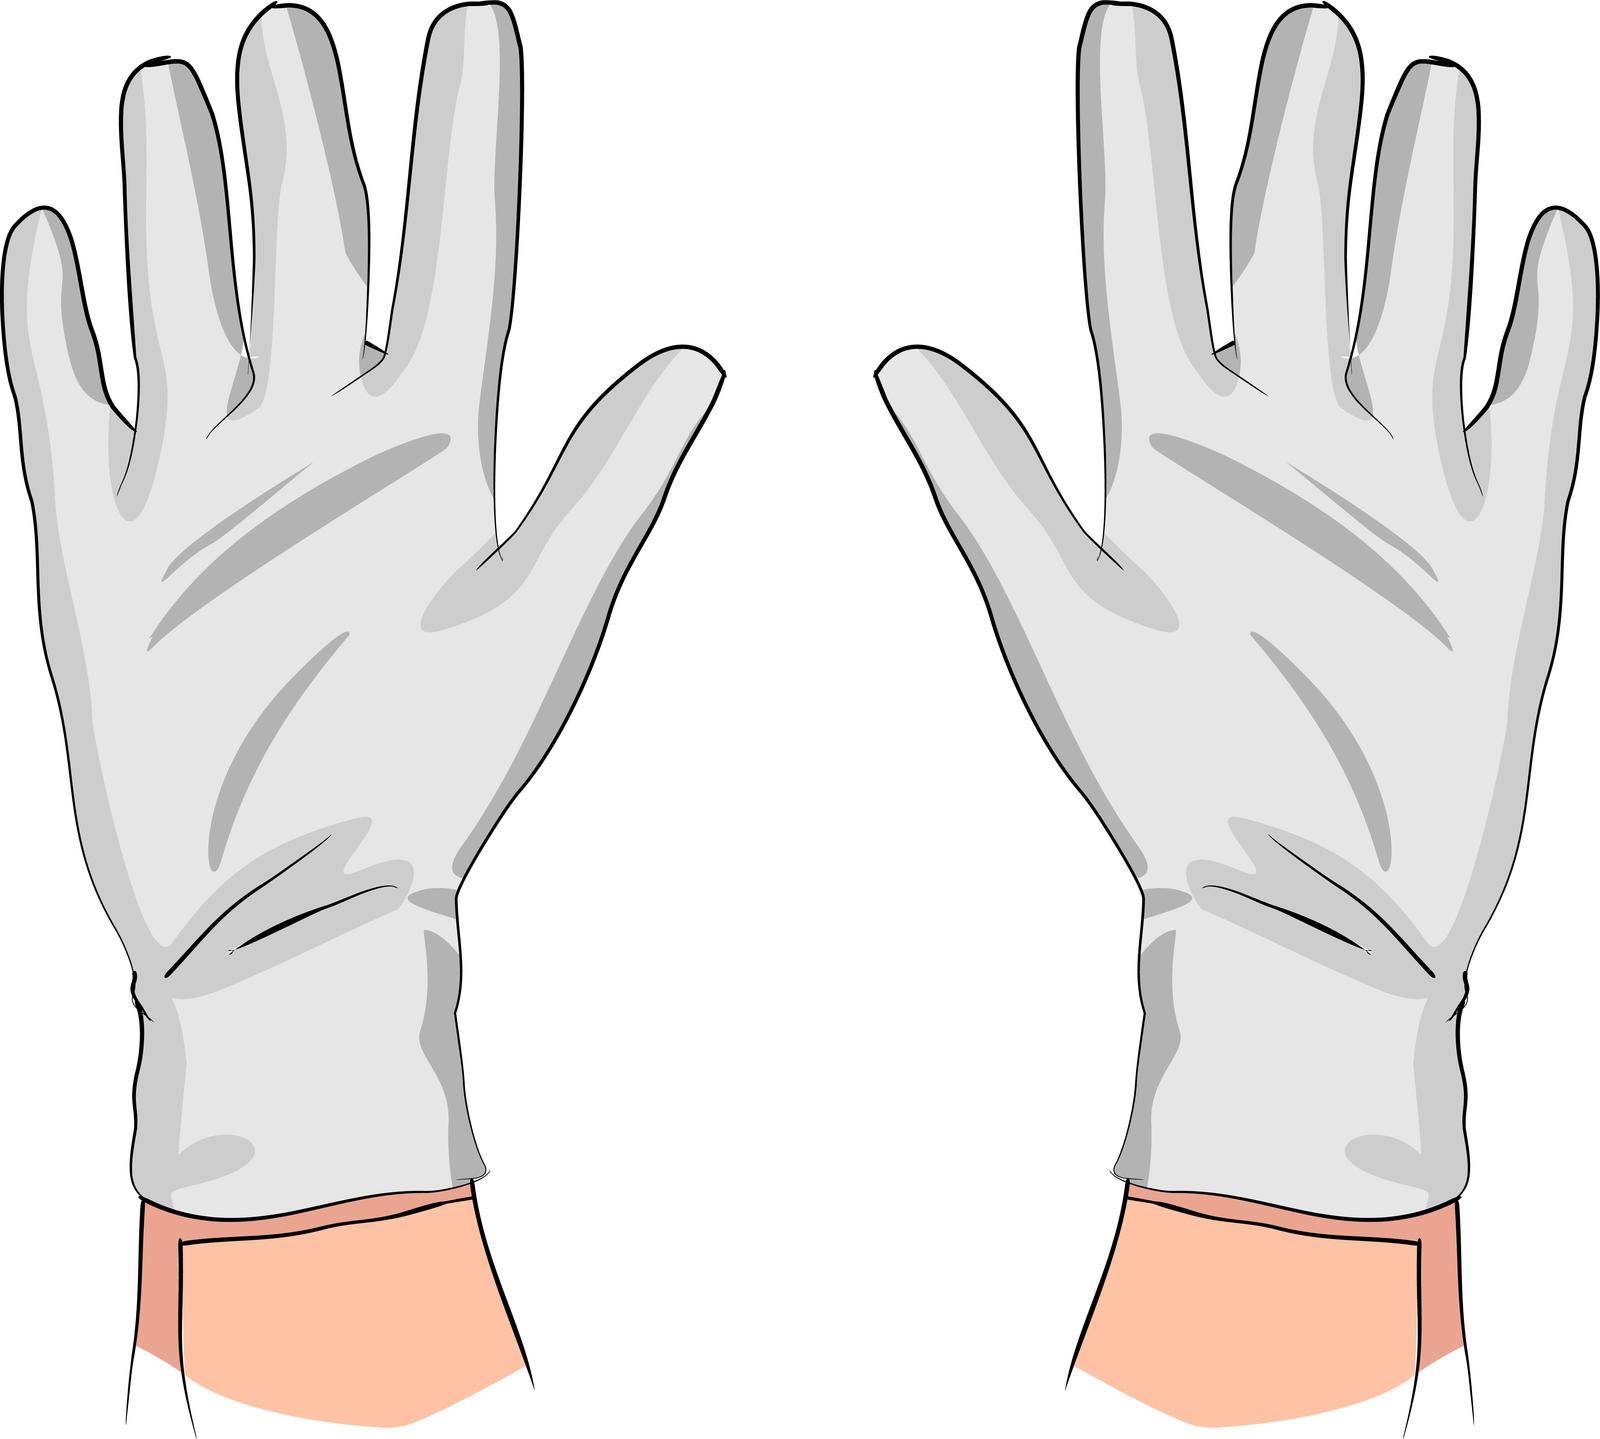 Medical gloves on the hands of a doctor. Vector.